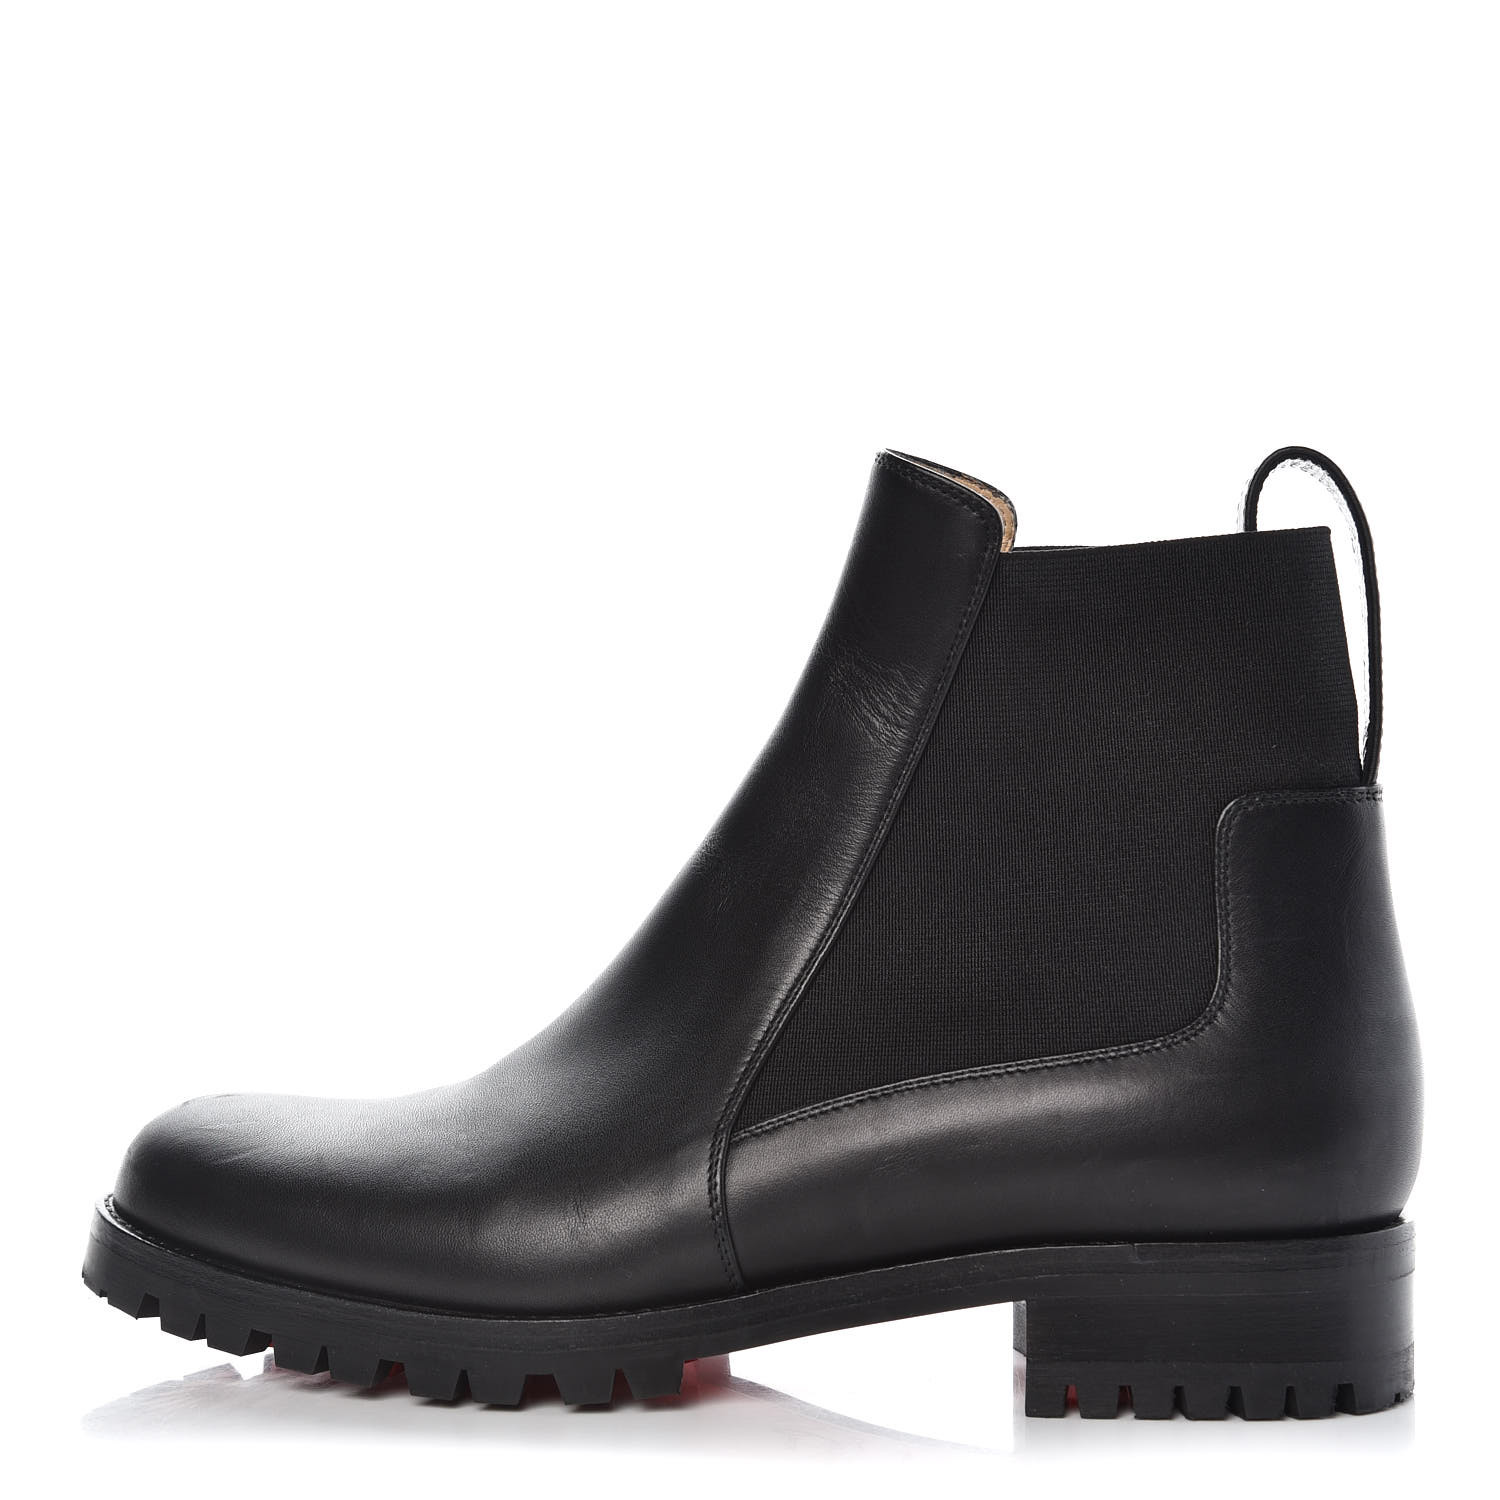 christian louboutin marcharoche leather ankle boots